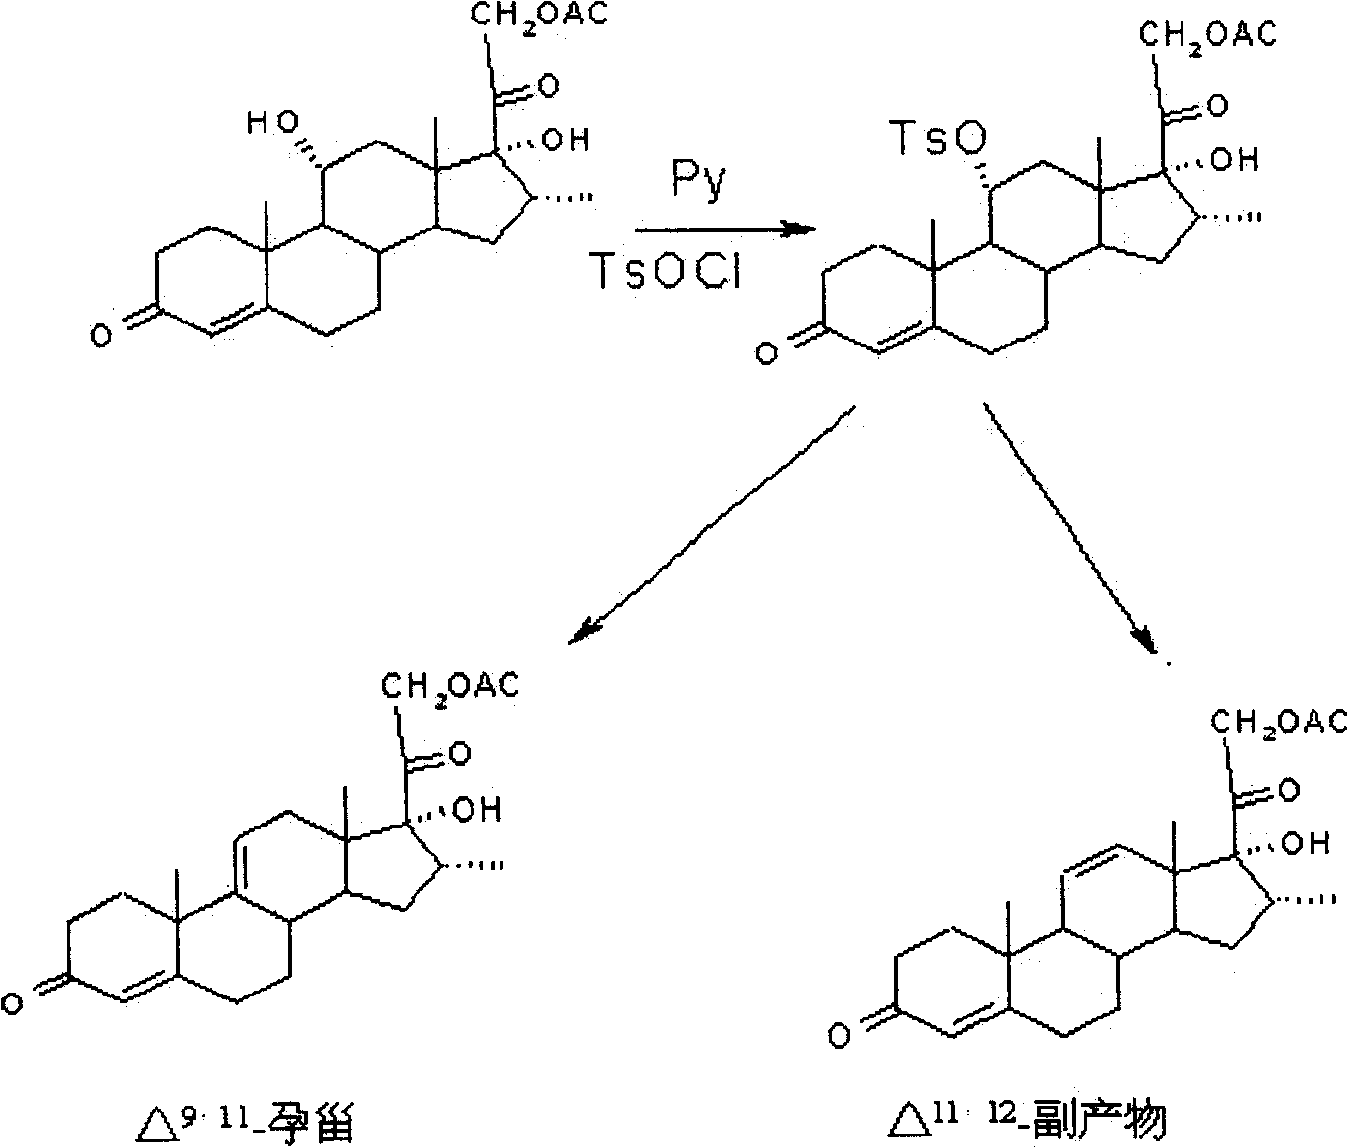 Synthesis process of a pregnane compound